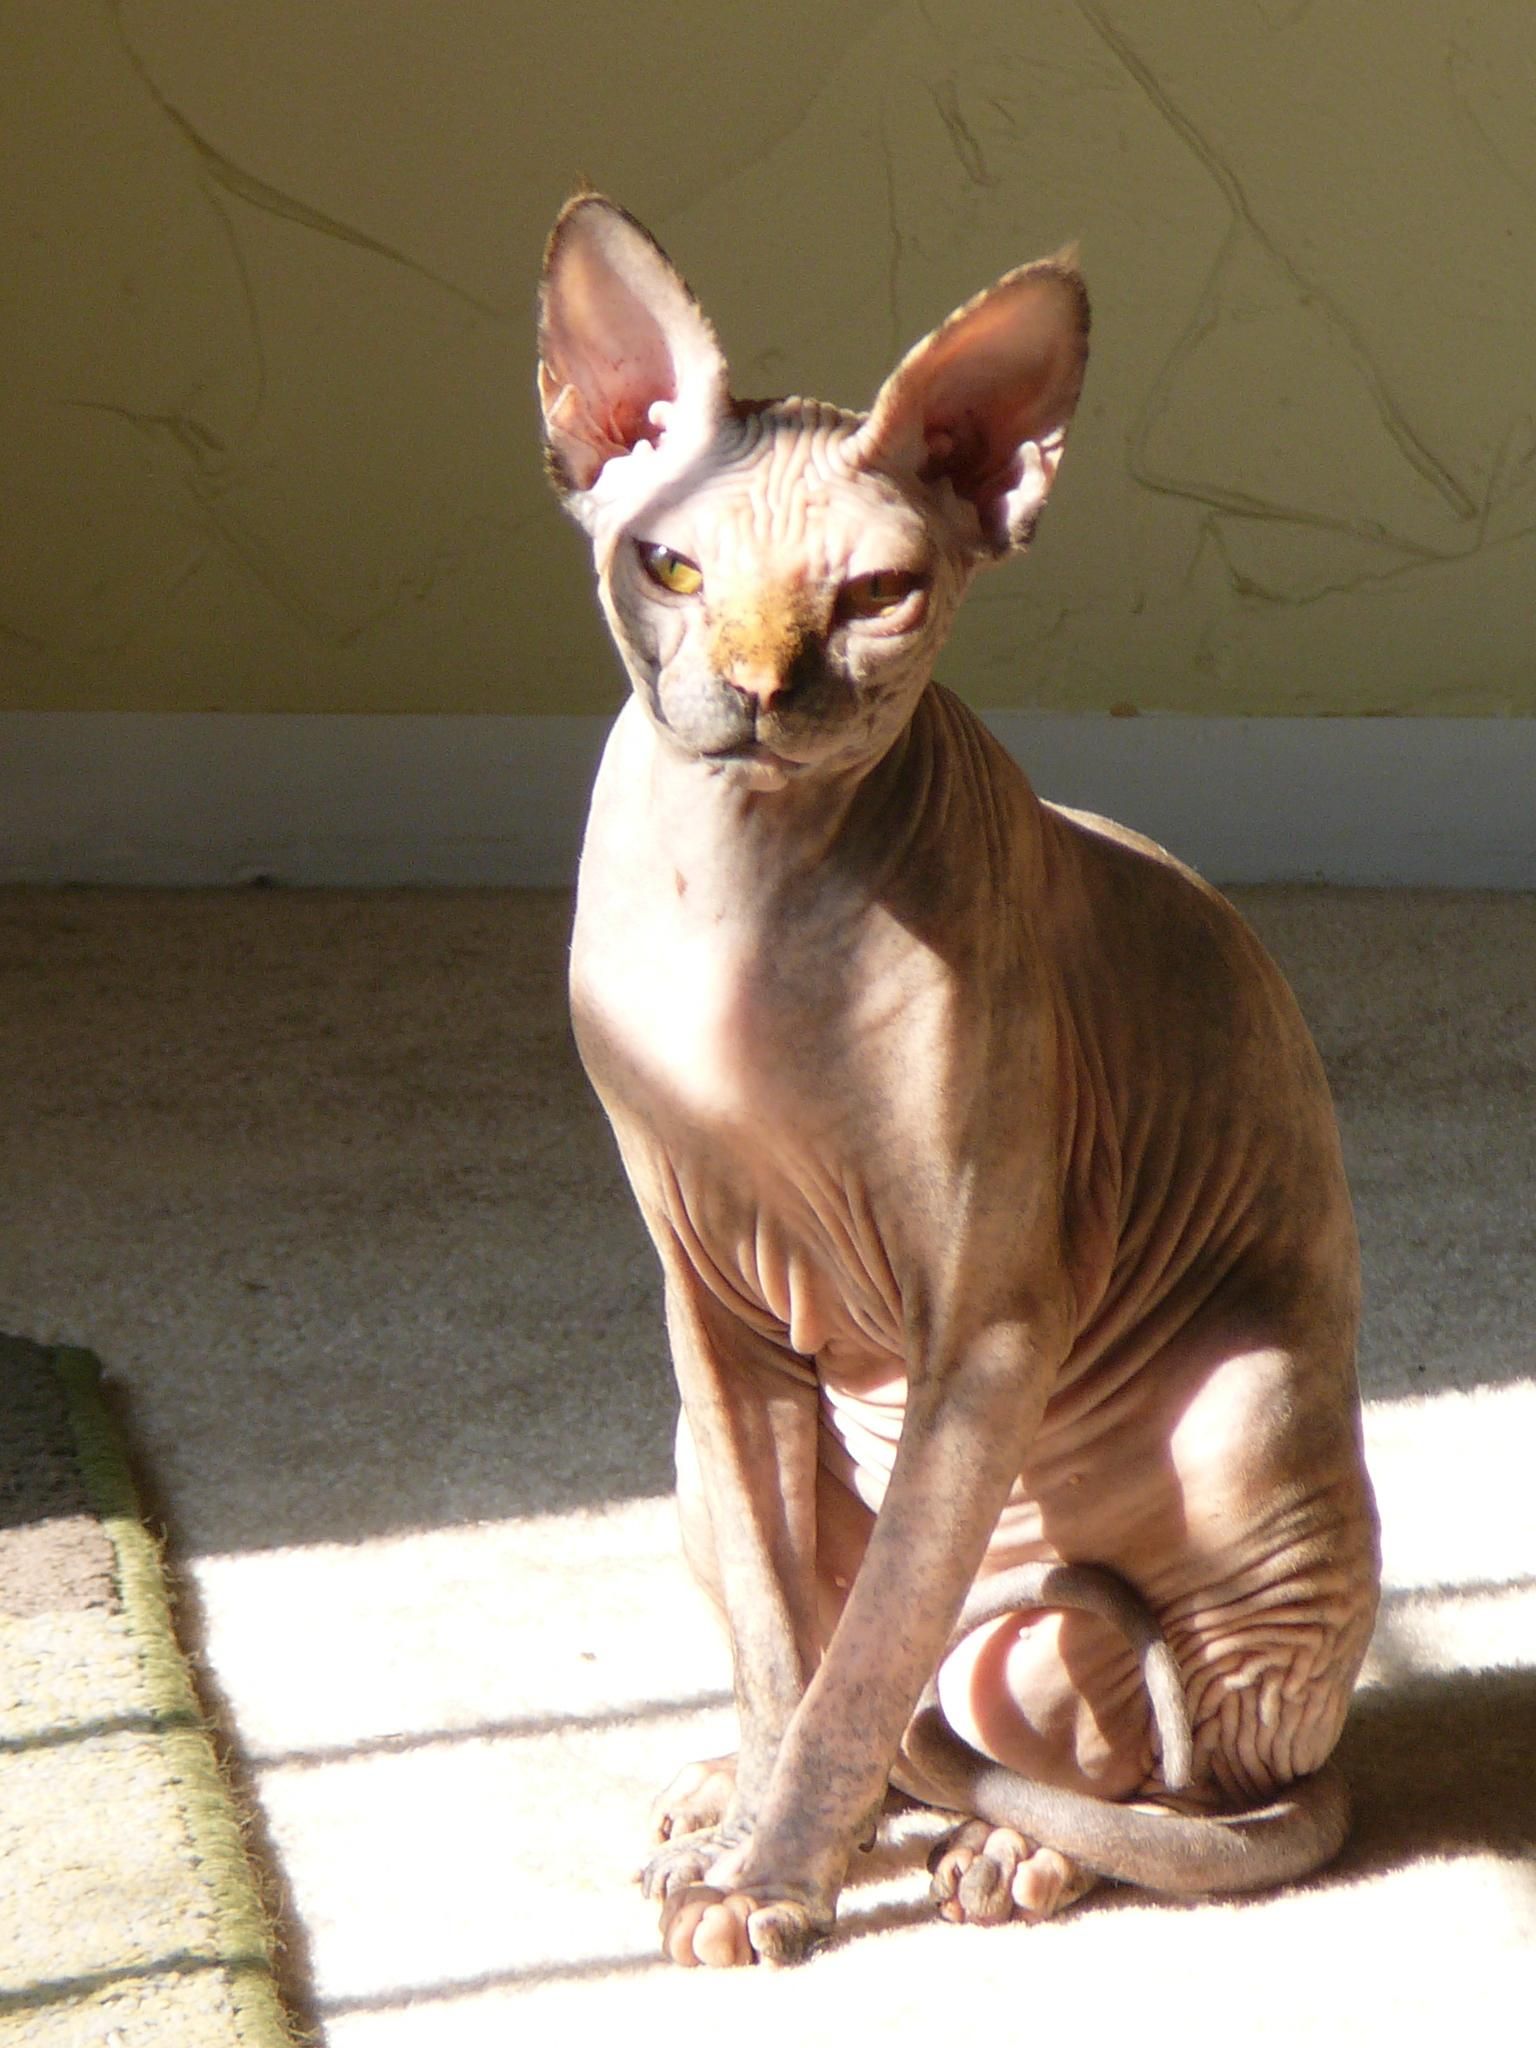 Sphynx Wallpaper. Sphynx Wallpaper, Sphynx Background and Sphynx Cat Wallpaper